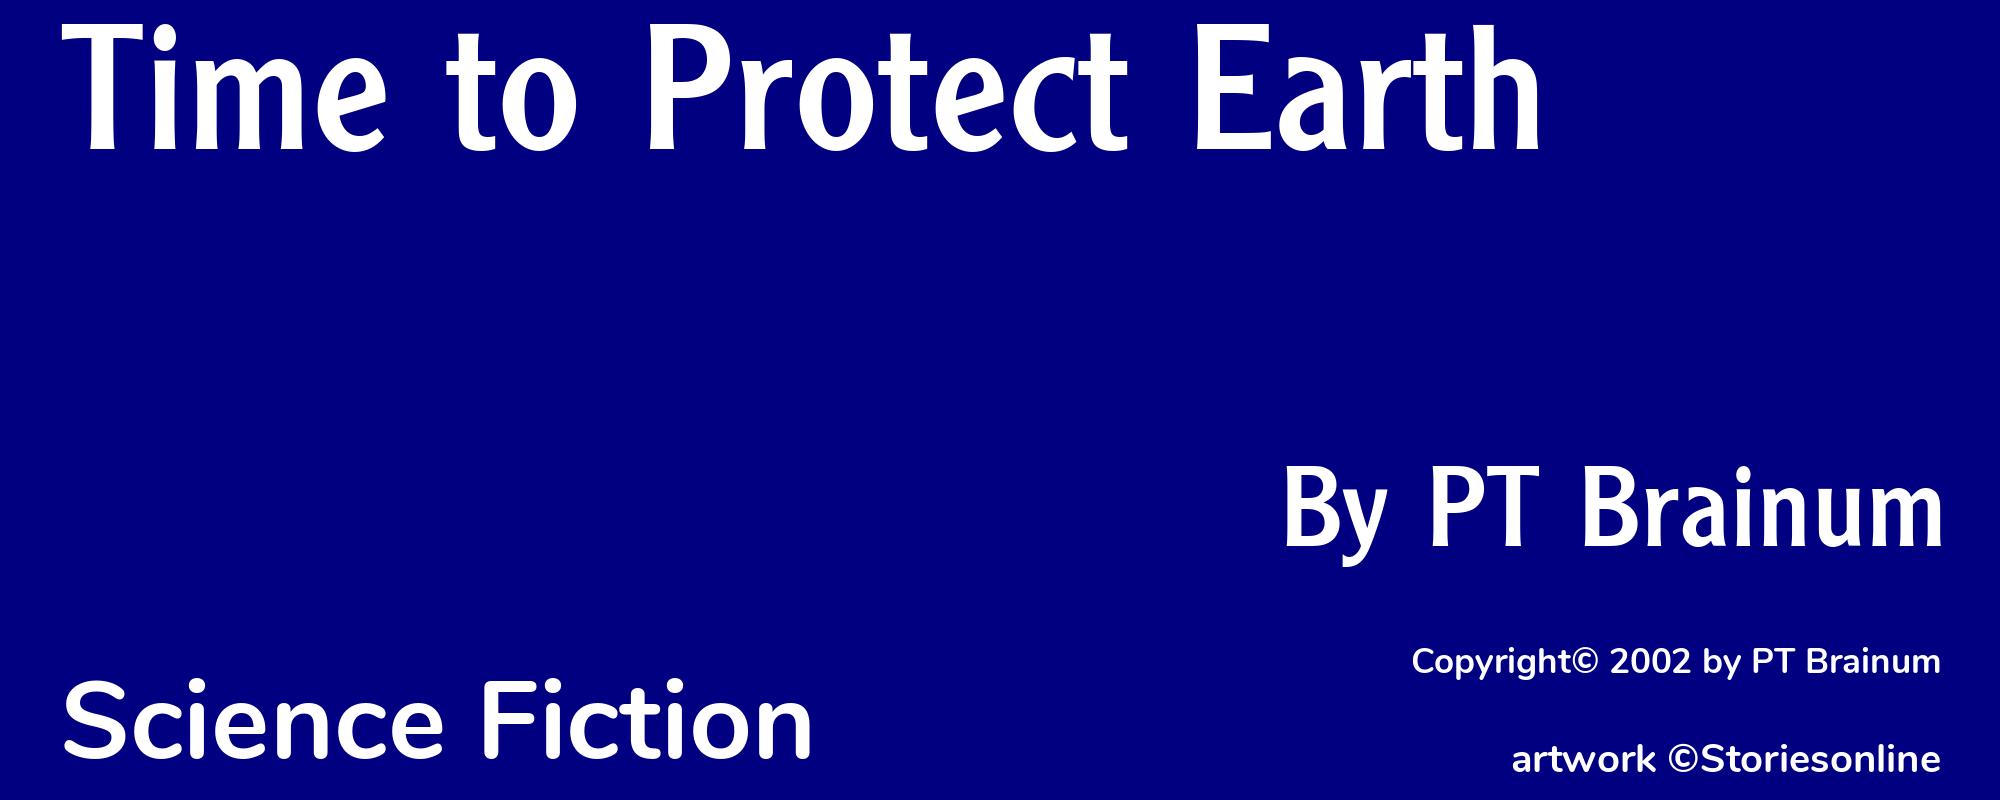 Time to Protect Earth - Cover